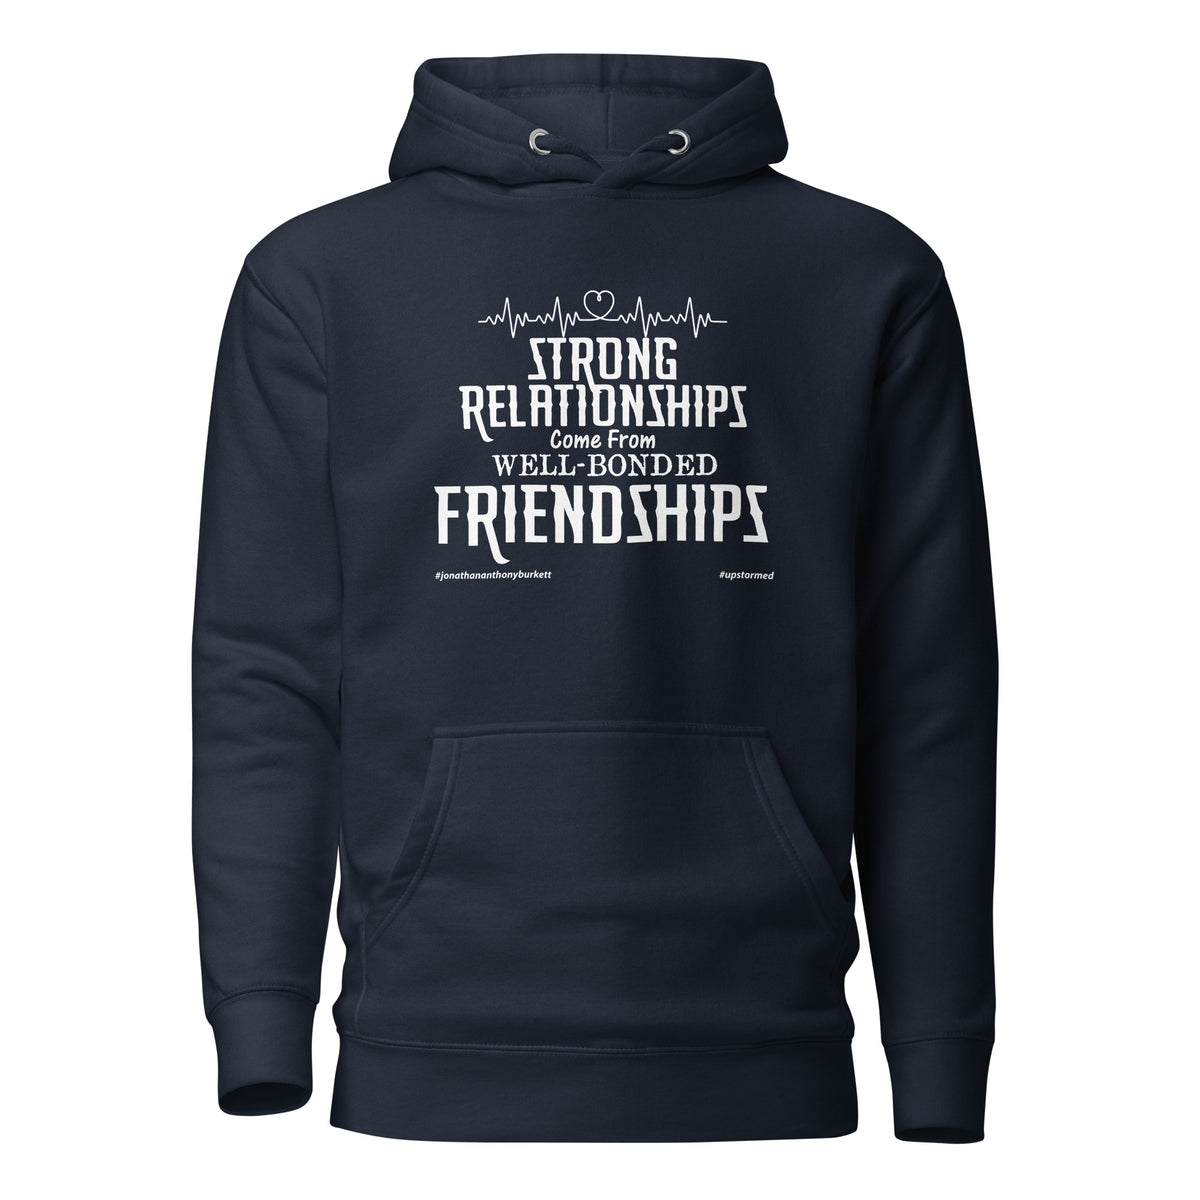 Strong Relationships Come From Well-Bonded Friendships Upstormed Hoodie